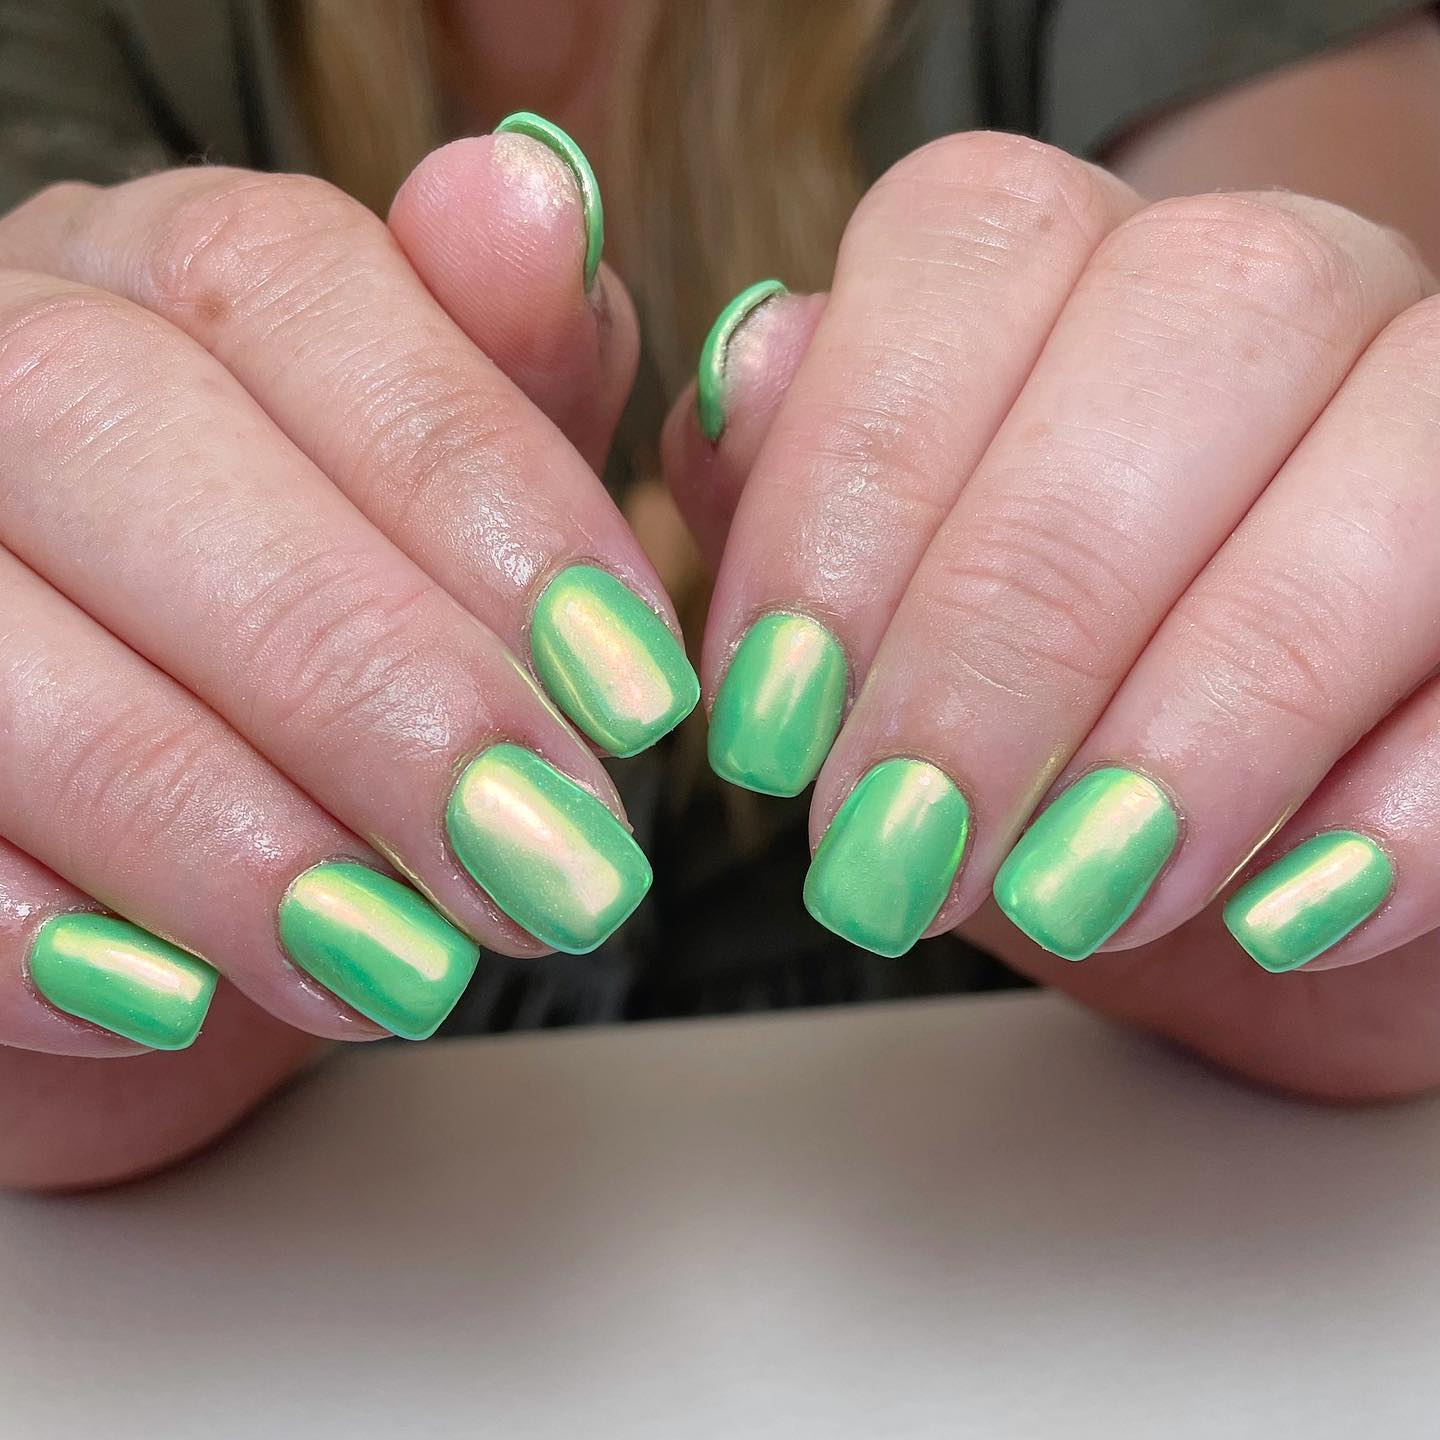 All shades of green are perfect but light green is always a favourite one. For your short nails, light green chrome nail polish is a nice idea.